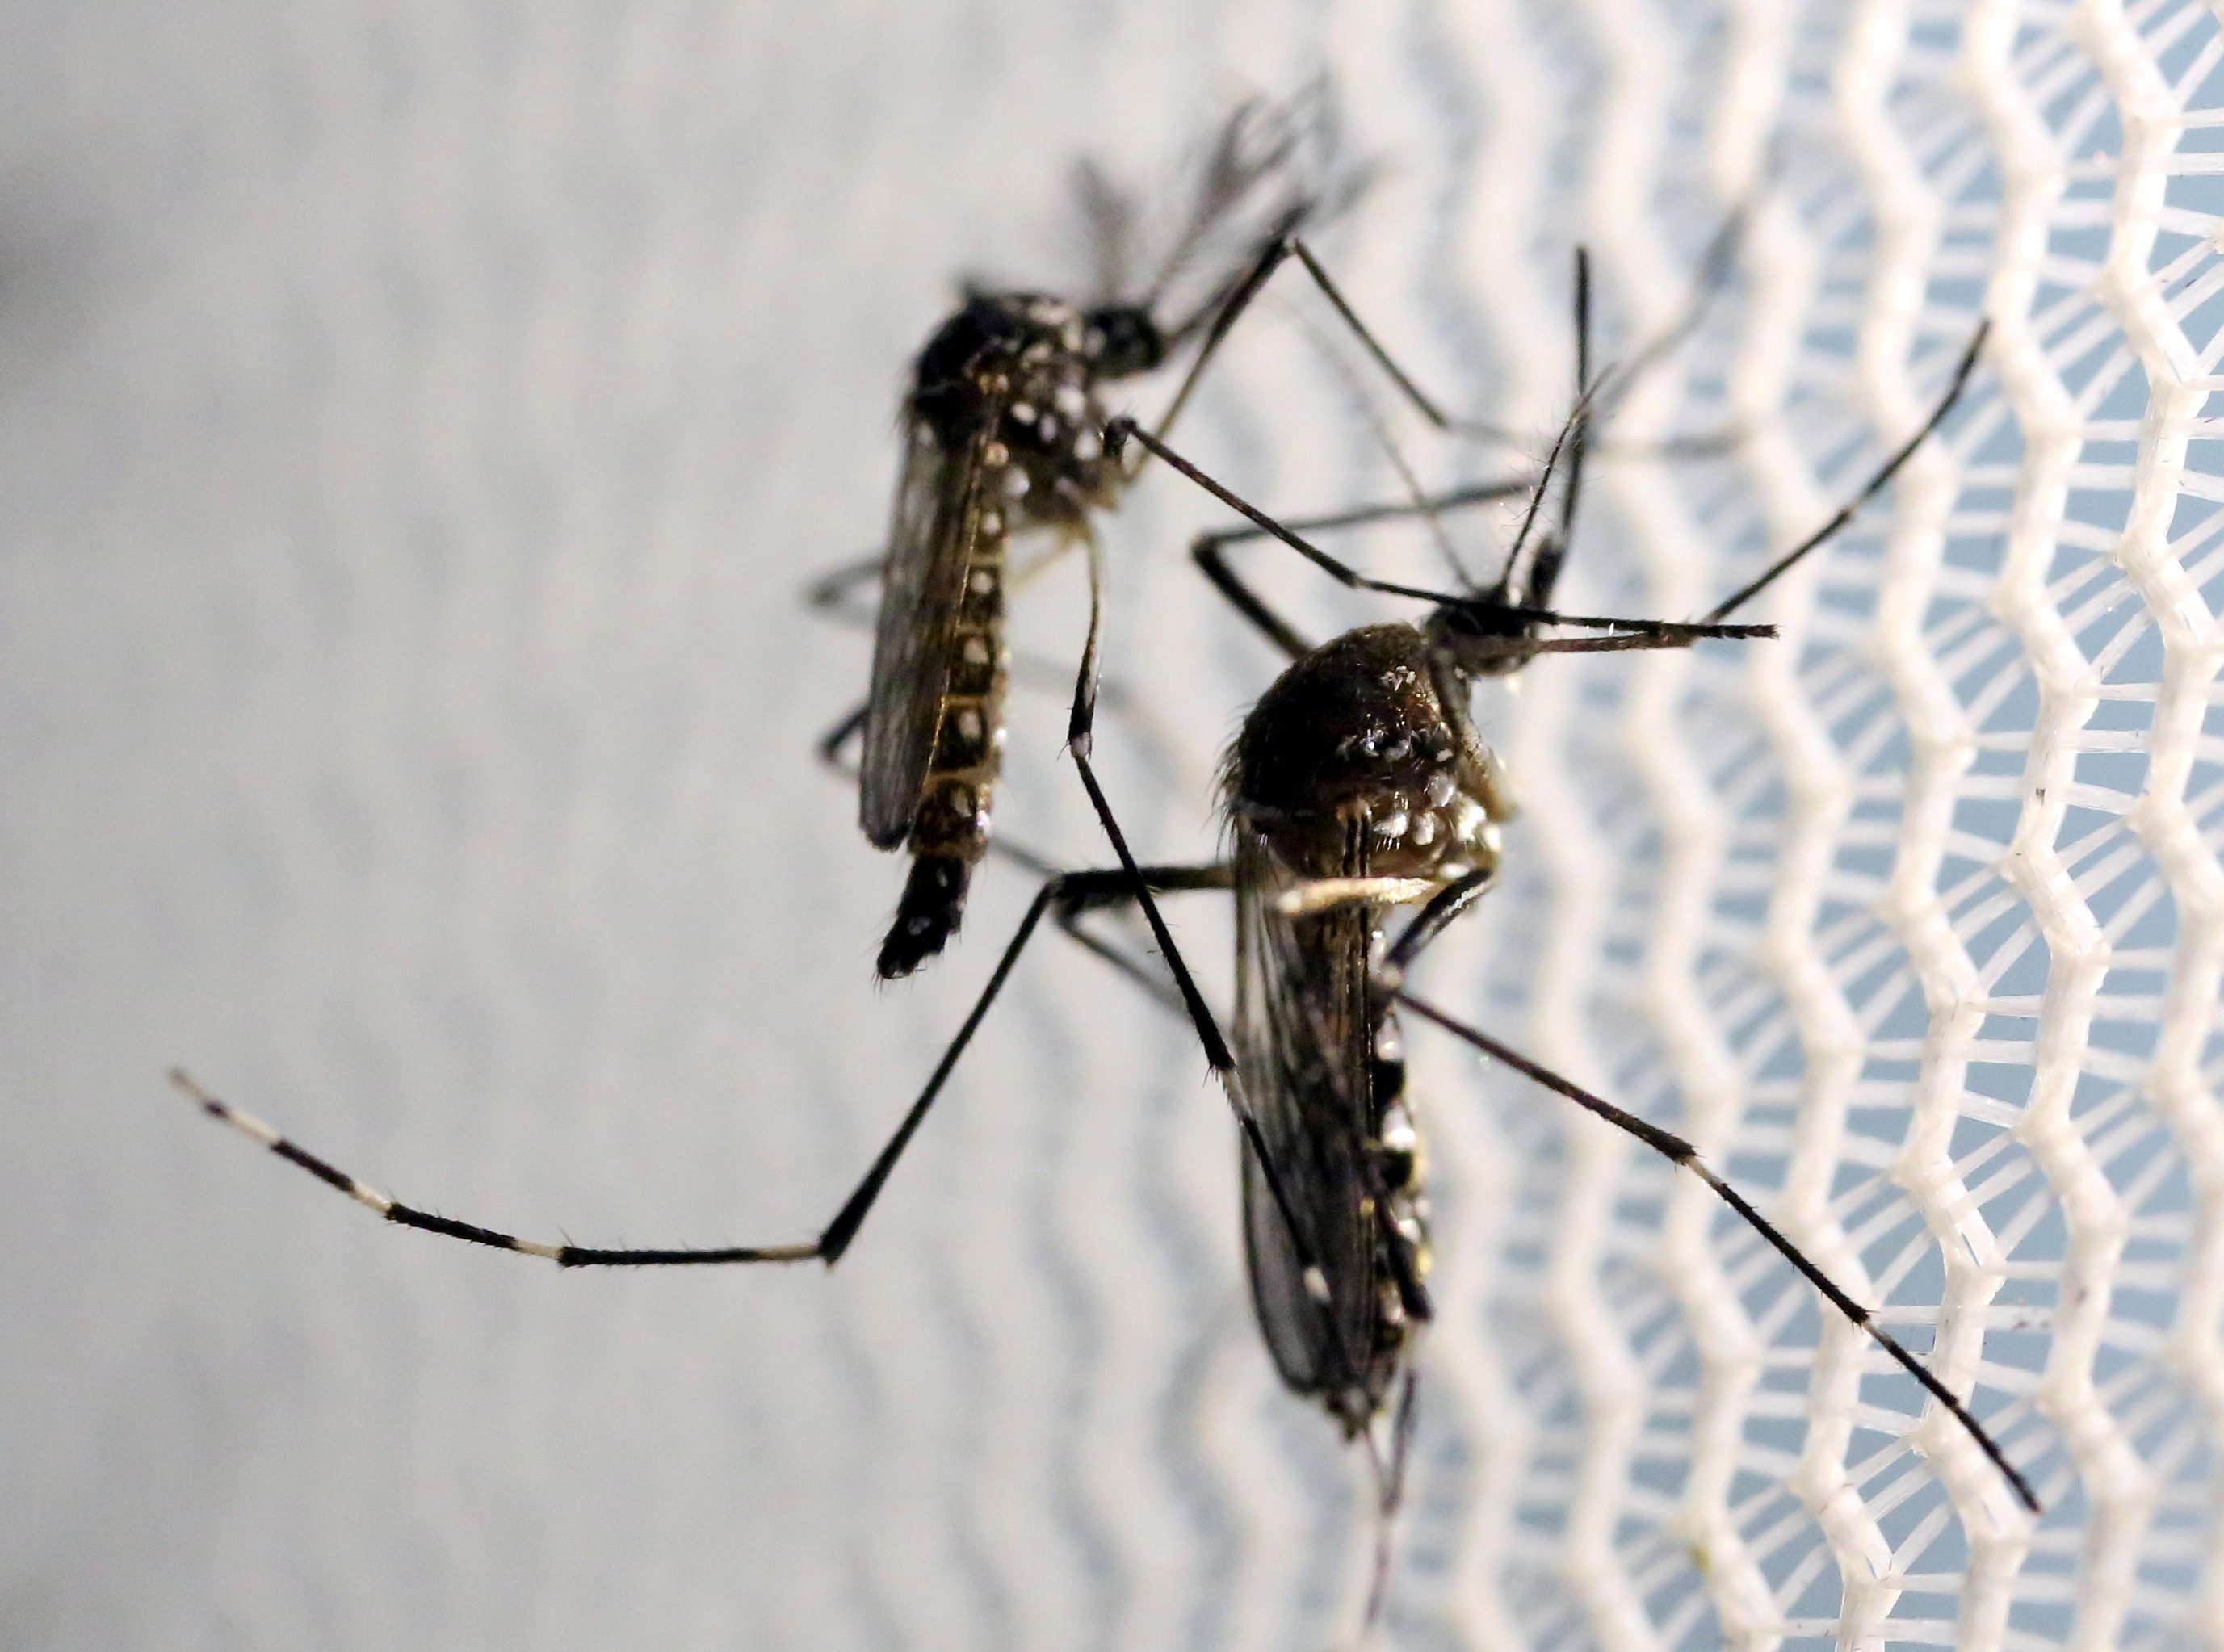 Aedes aegypti mosquitoes are seen inside Oxitec laboratory in Campinas, Brazil, Feb. 2, 2016. (Reuters Photo)